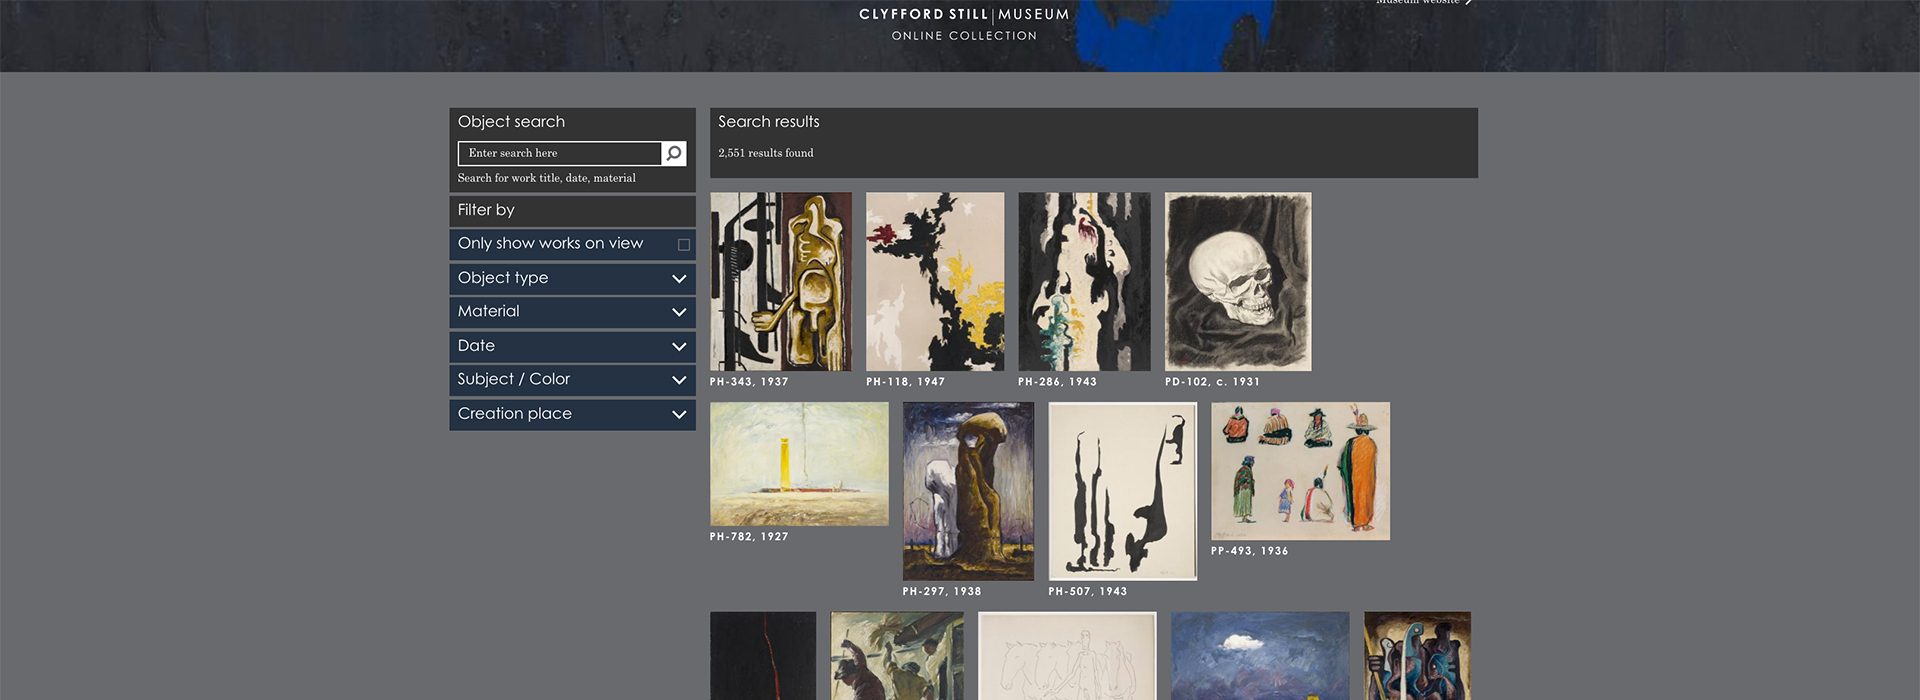 Thumbnail images of artworks in an online database